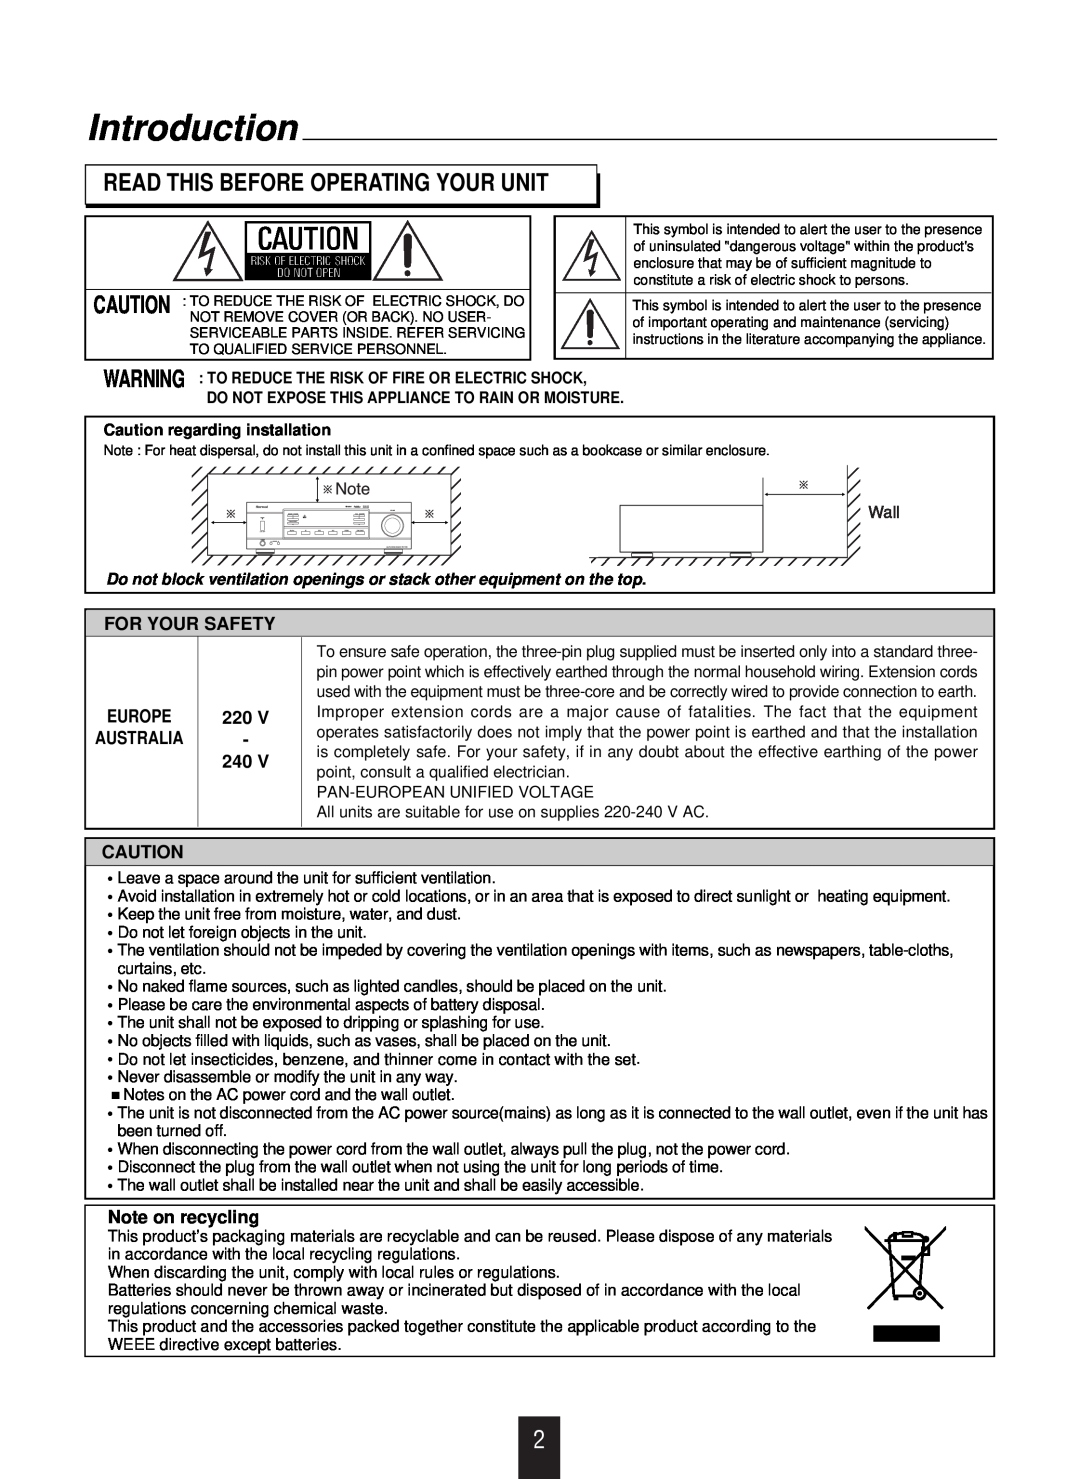 Sherwood RX-4109 manual Introduction, Read This Before Operating Your Unit, For Your Safety, Europe Australia, 220V 